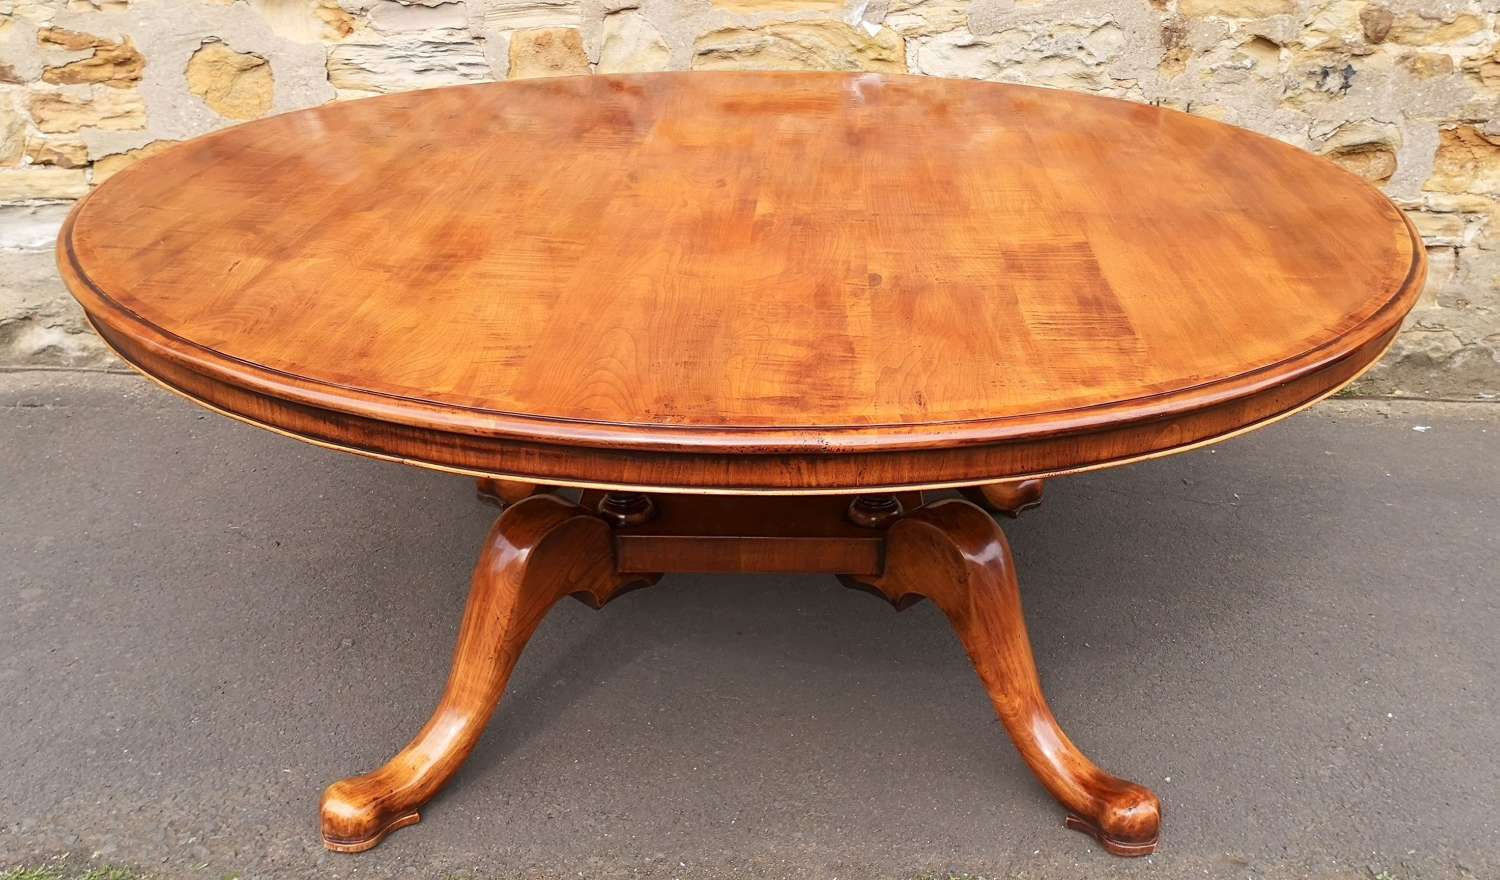 Simpsons of Norfolk Solid Cherry Wood Circular Dining Table - Seats Ei